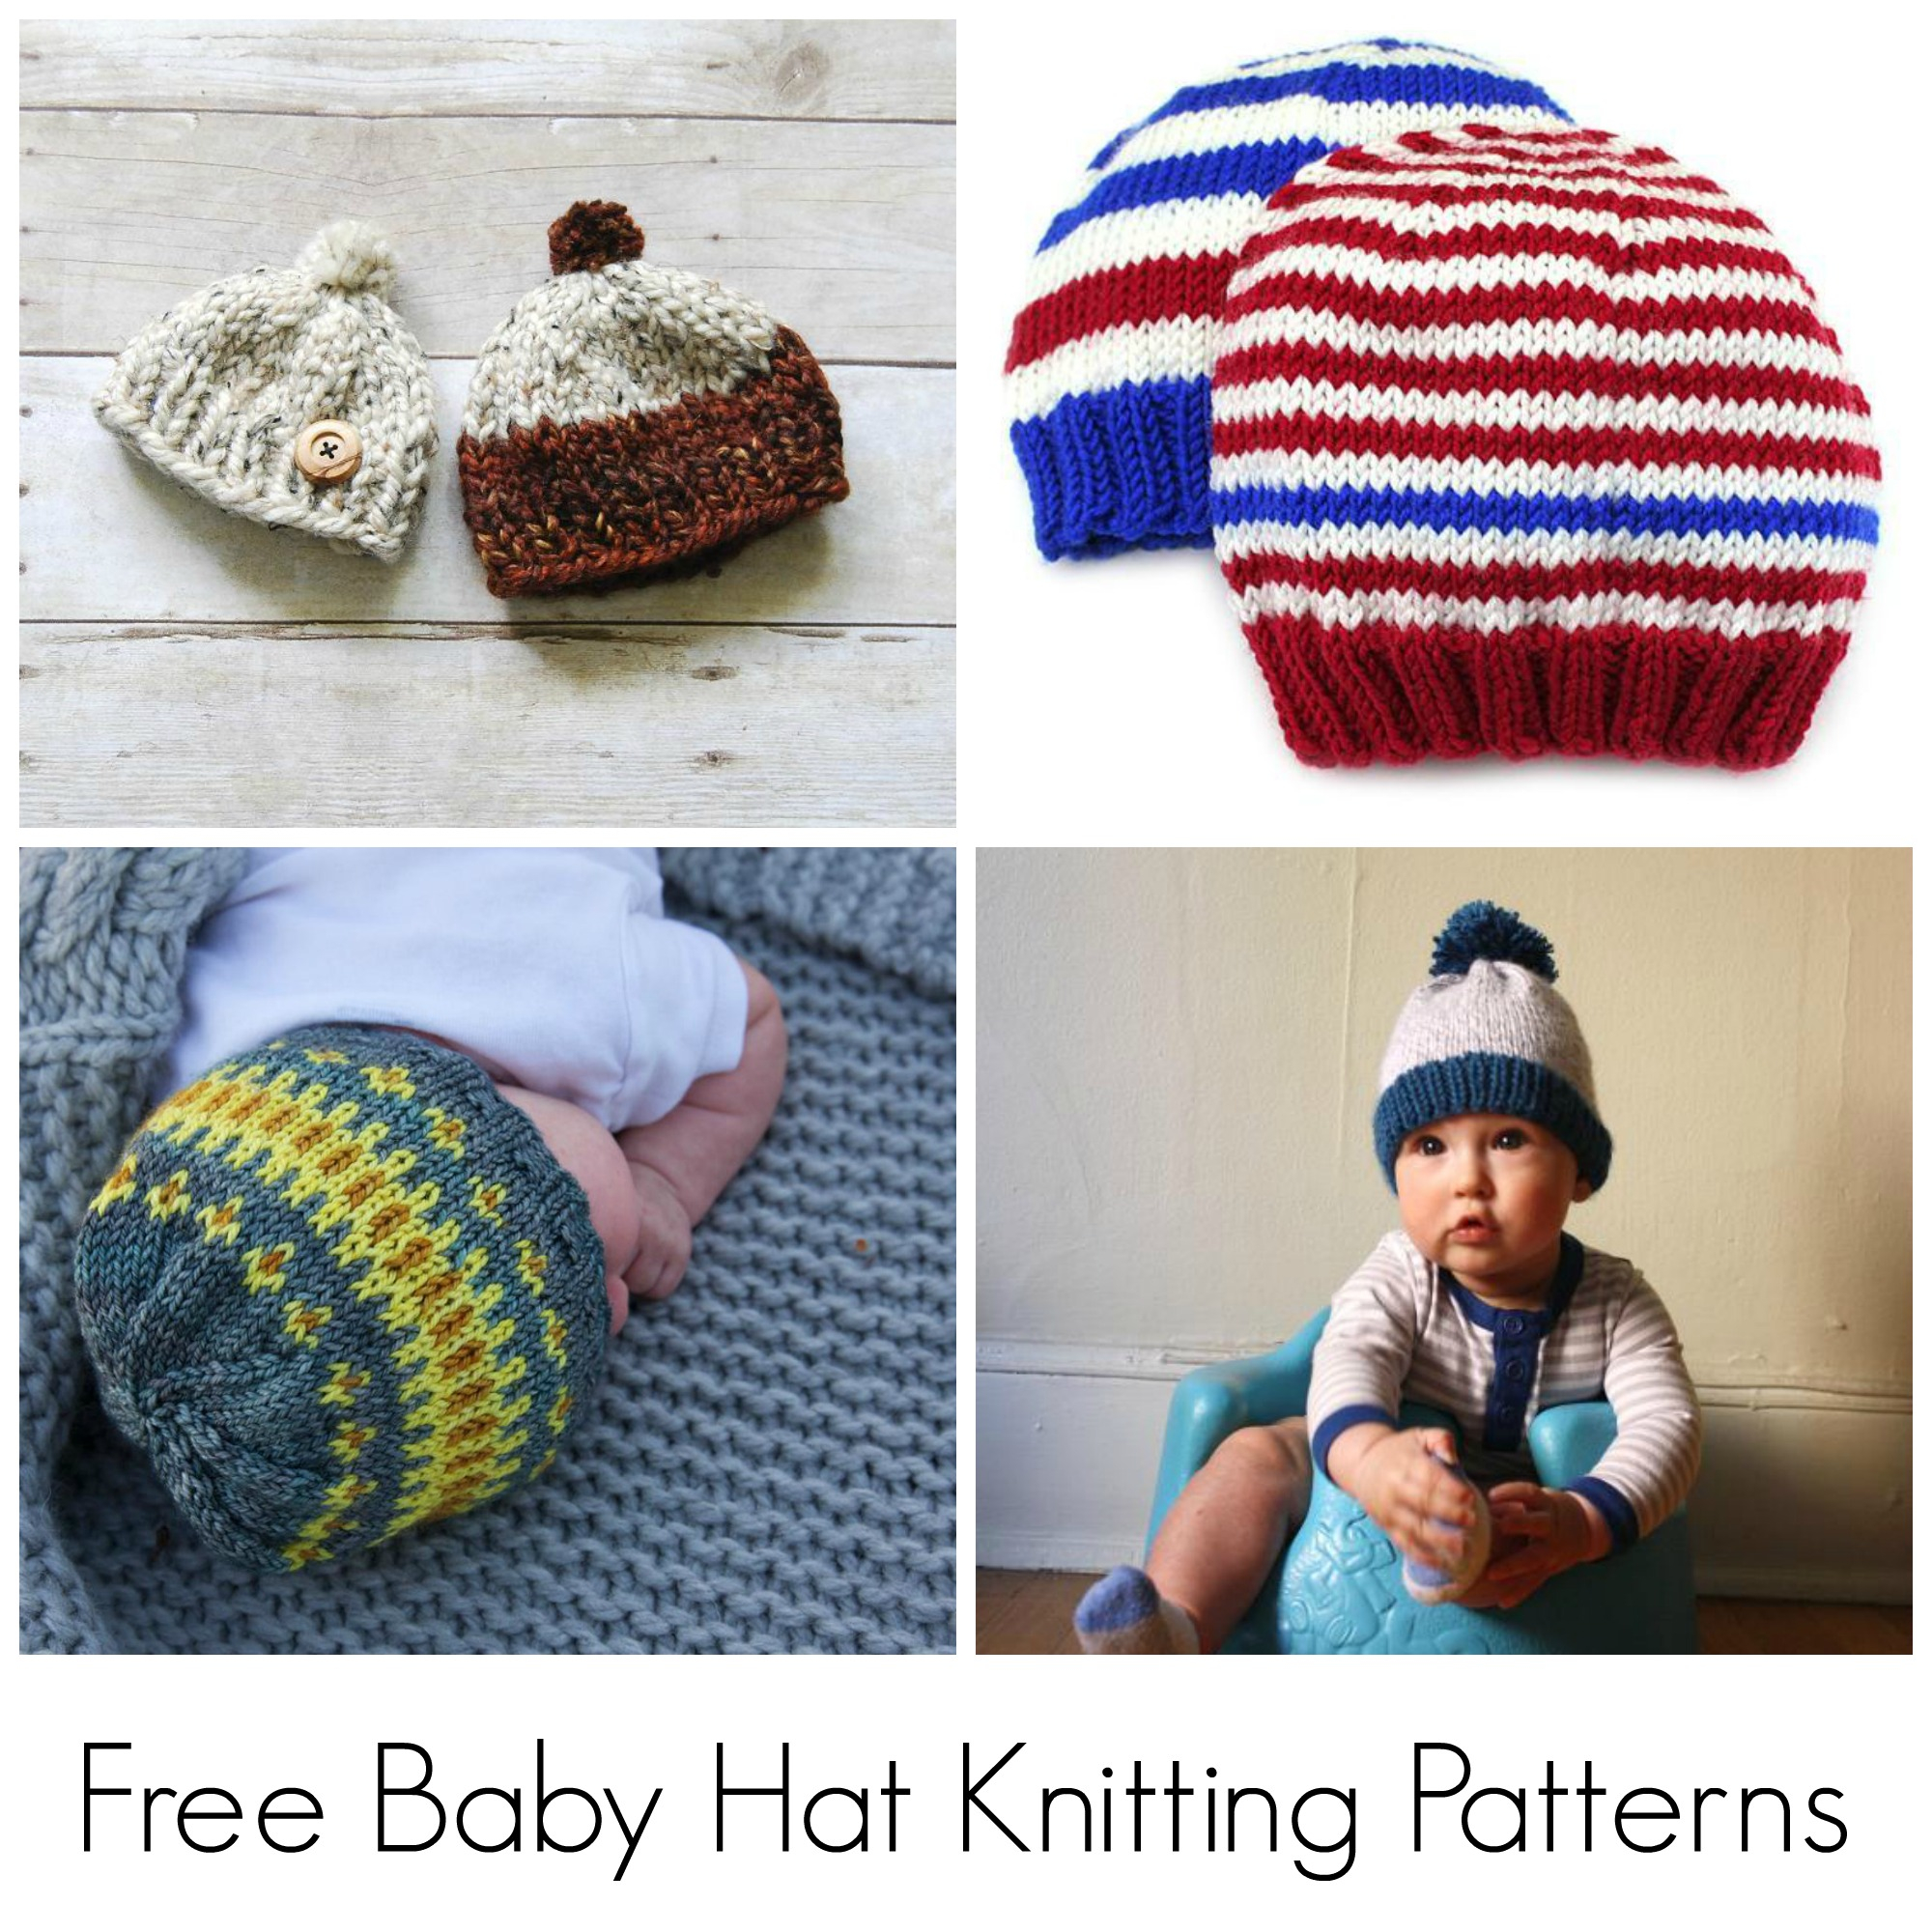 Free Knitting Patterns Babies 10 Free Knitting Patterns For Ba Hats On Craftsy